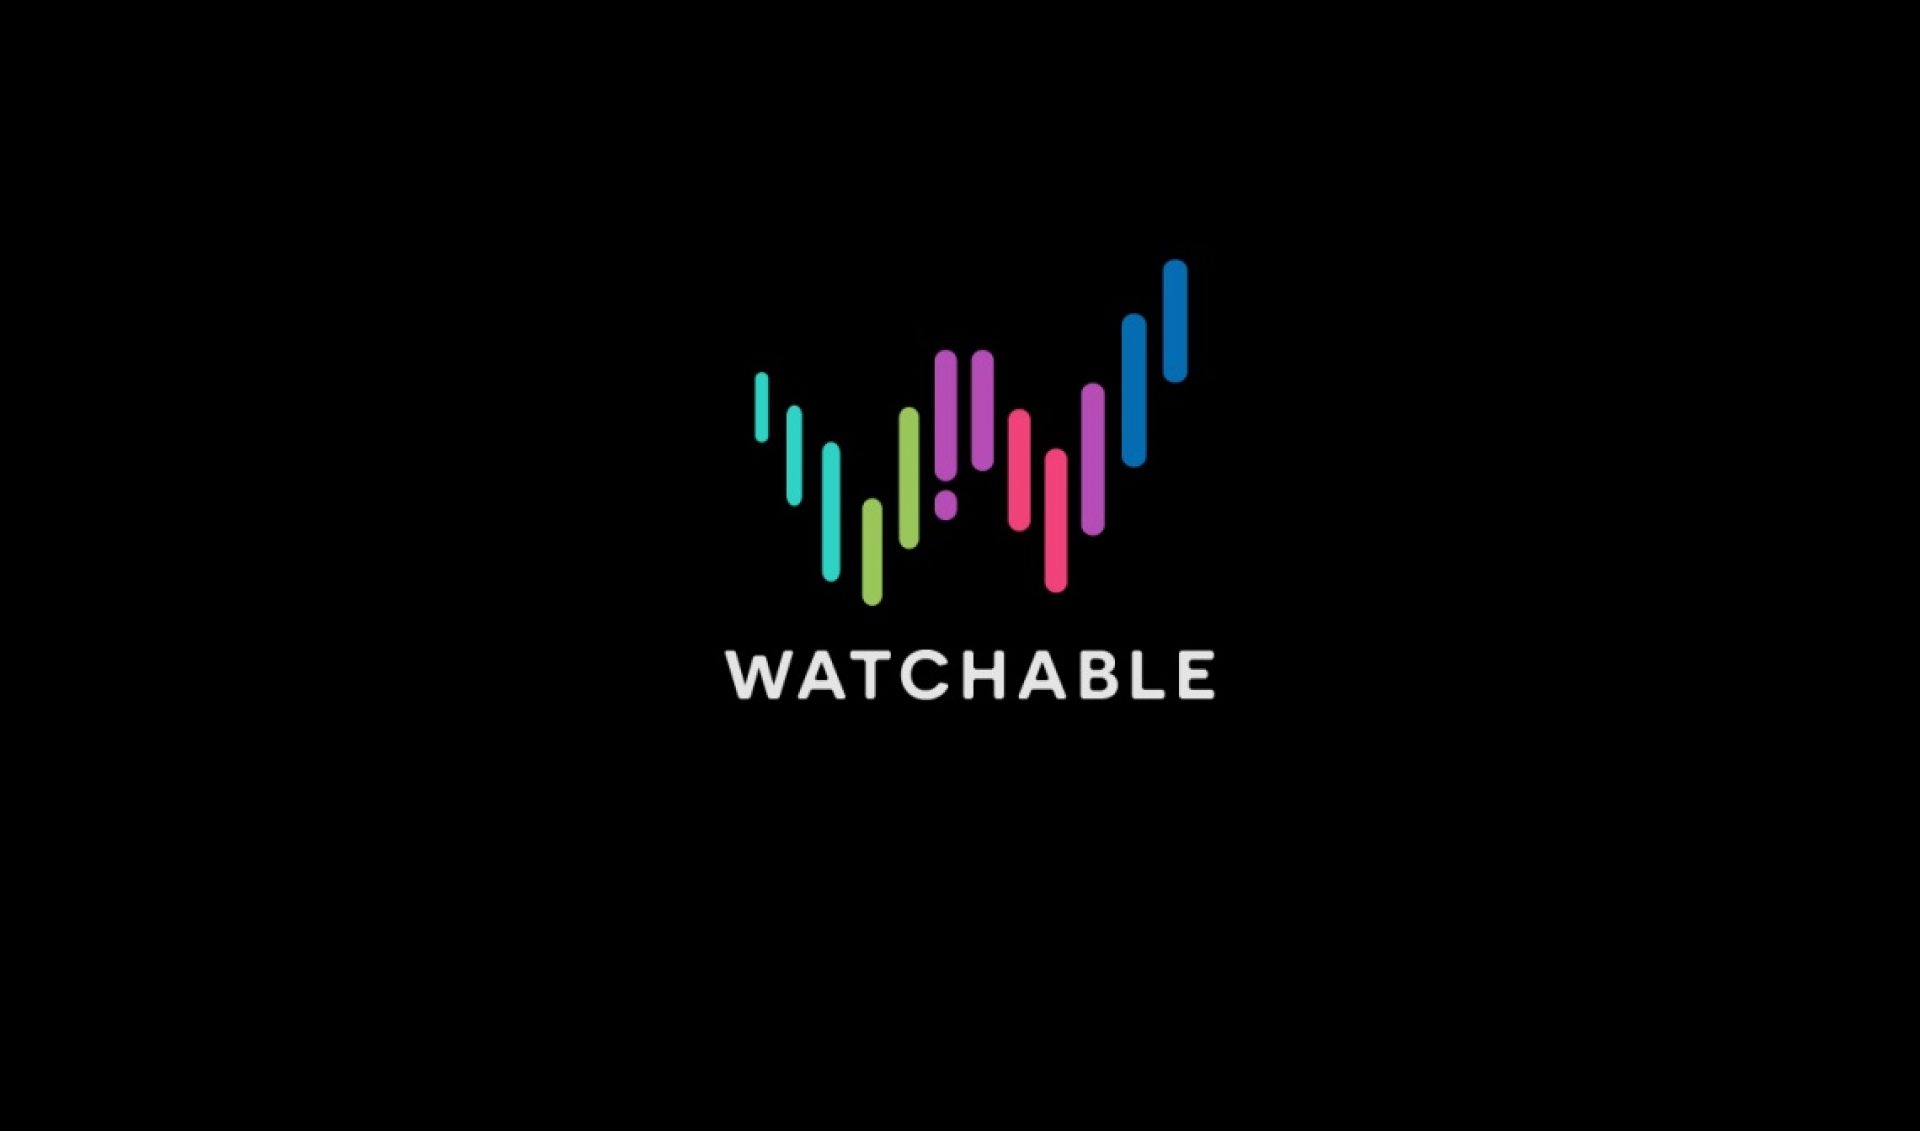 Comcast Launches Free Video Service ‘Watchable’, Curates Content From 30 Different Brands